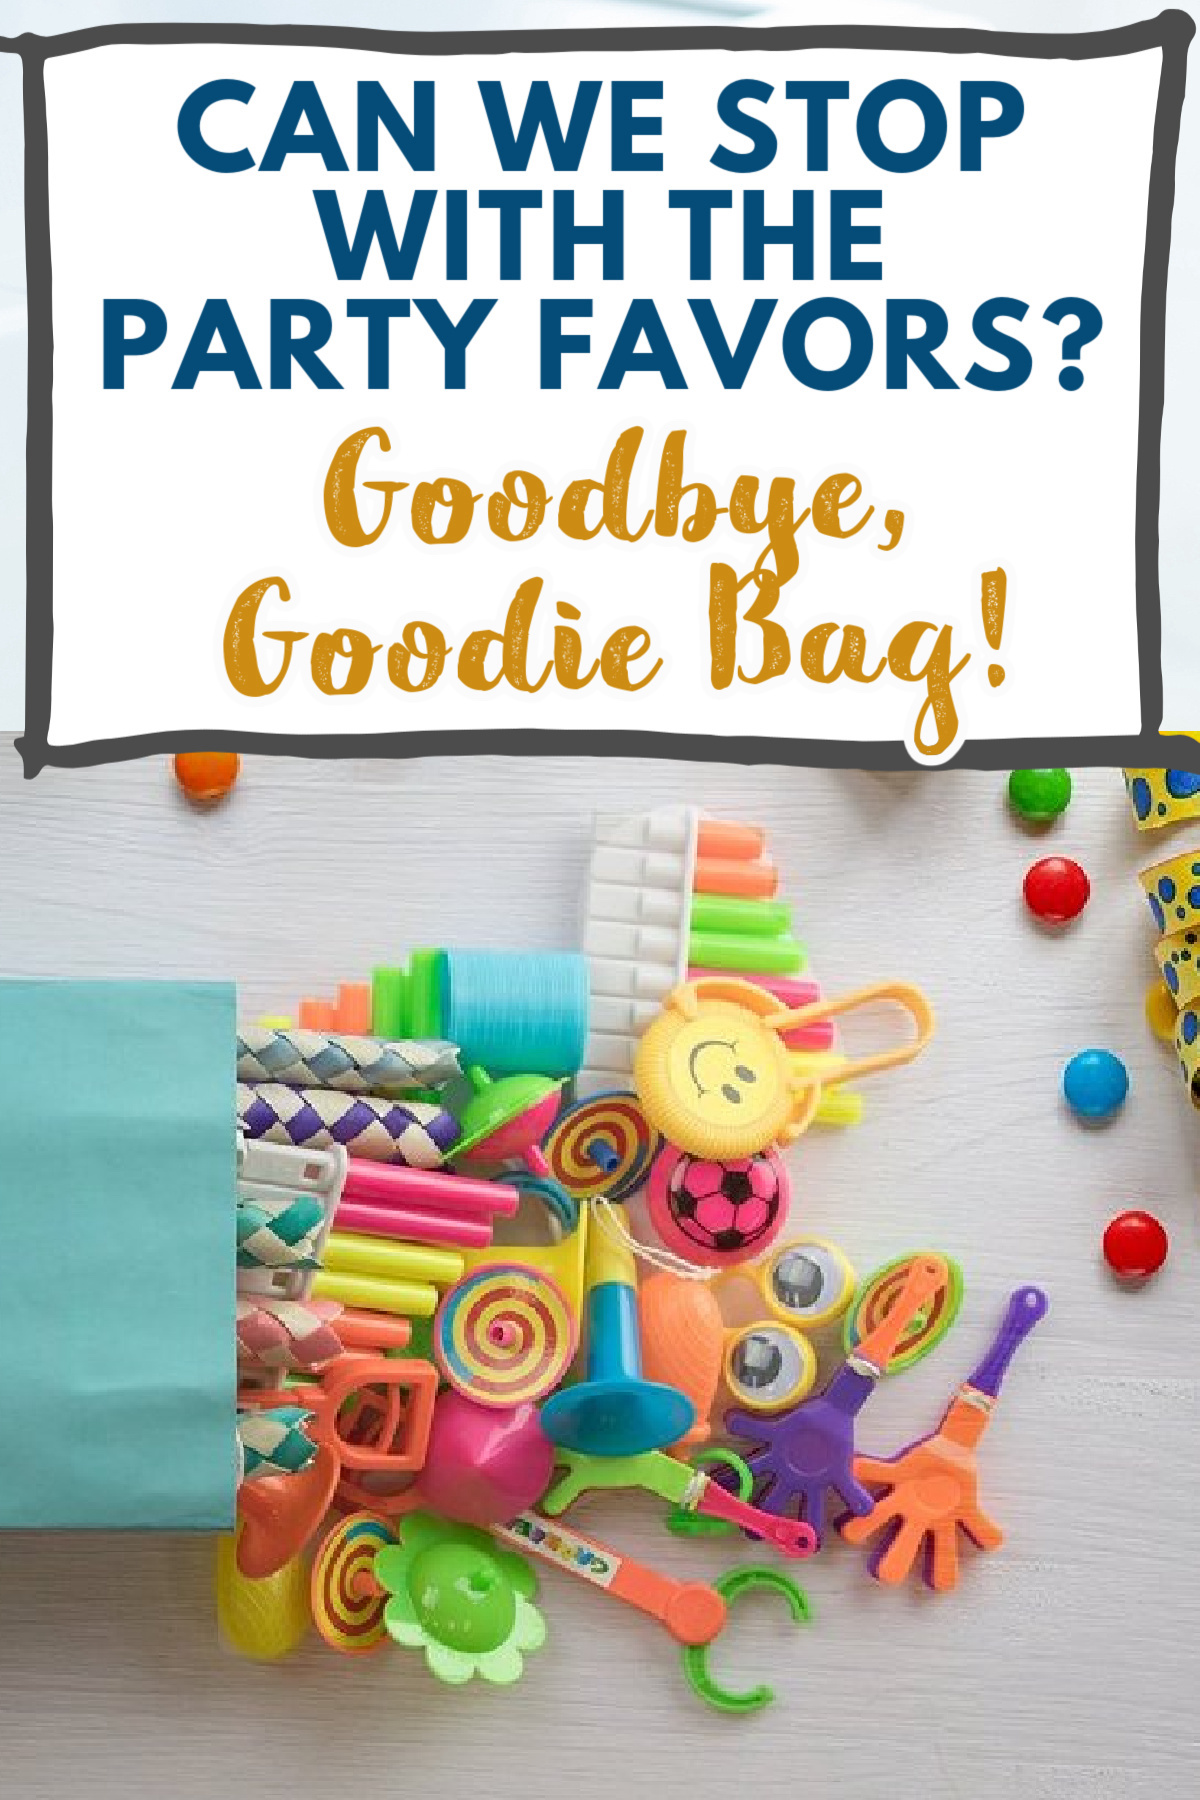 PAW Patrol Party Ideas (Food, Decorations, Games, and Free Printables) -  Fab Everyday